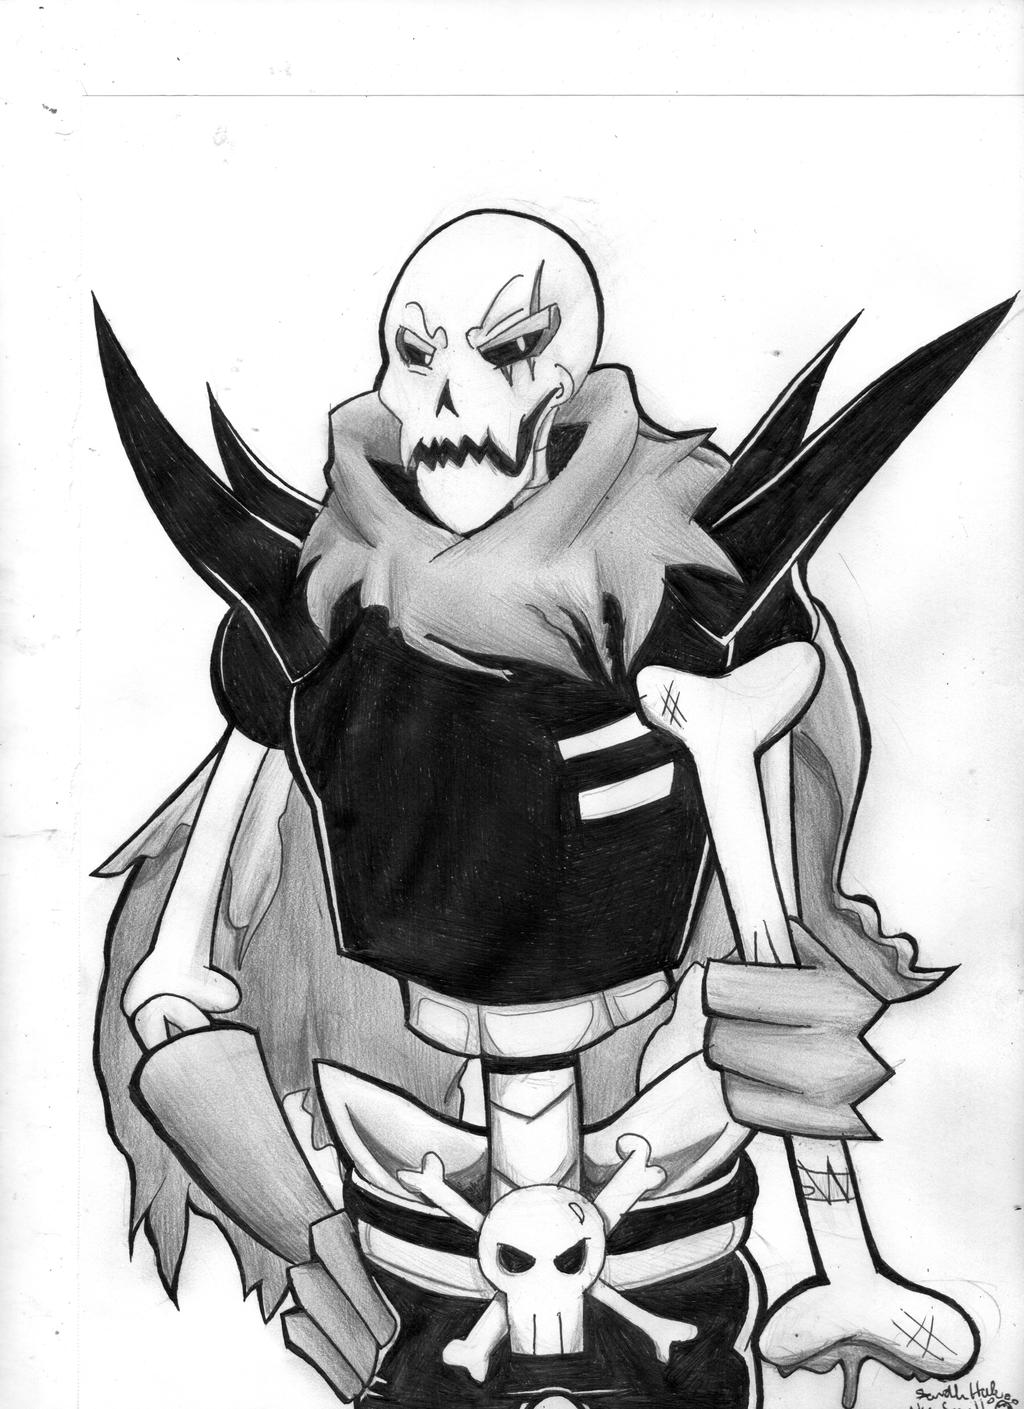 Underfell Papyrus by ASmallOne on DeviantArt